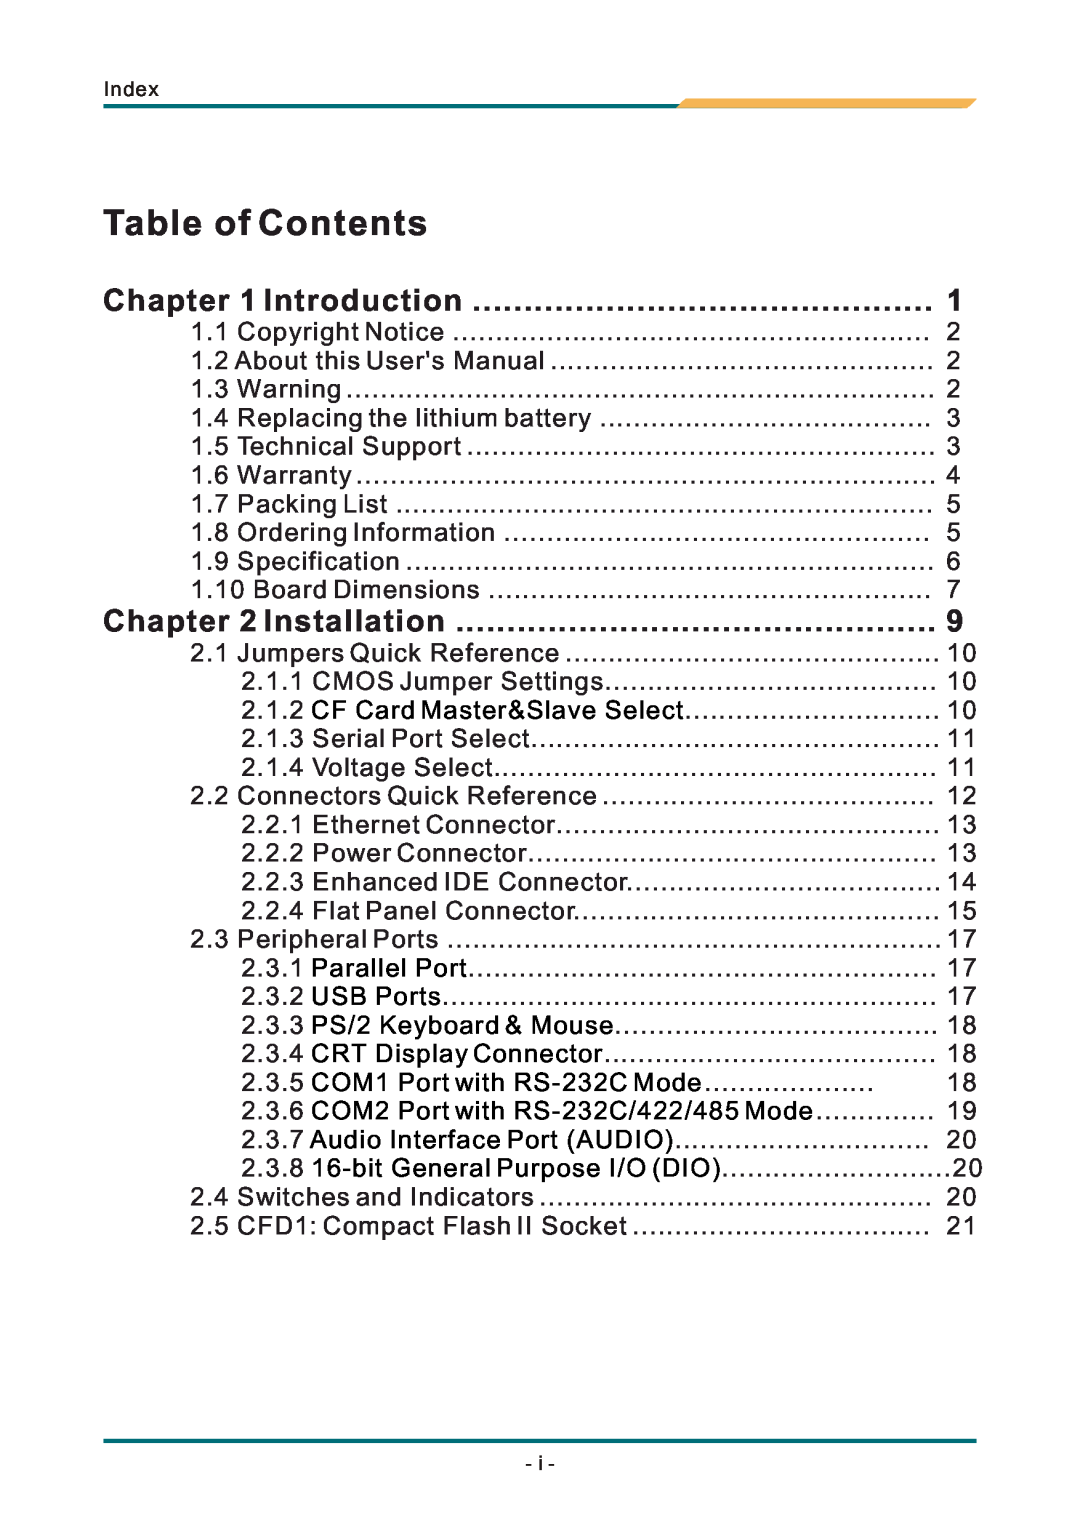 AMD SBX-5363 manual Table of Contents, Introduction, Installation 